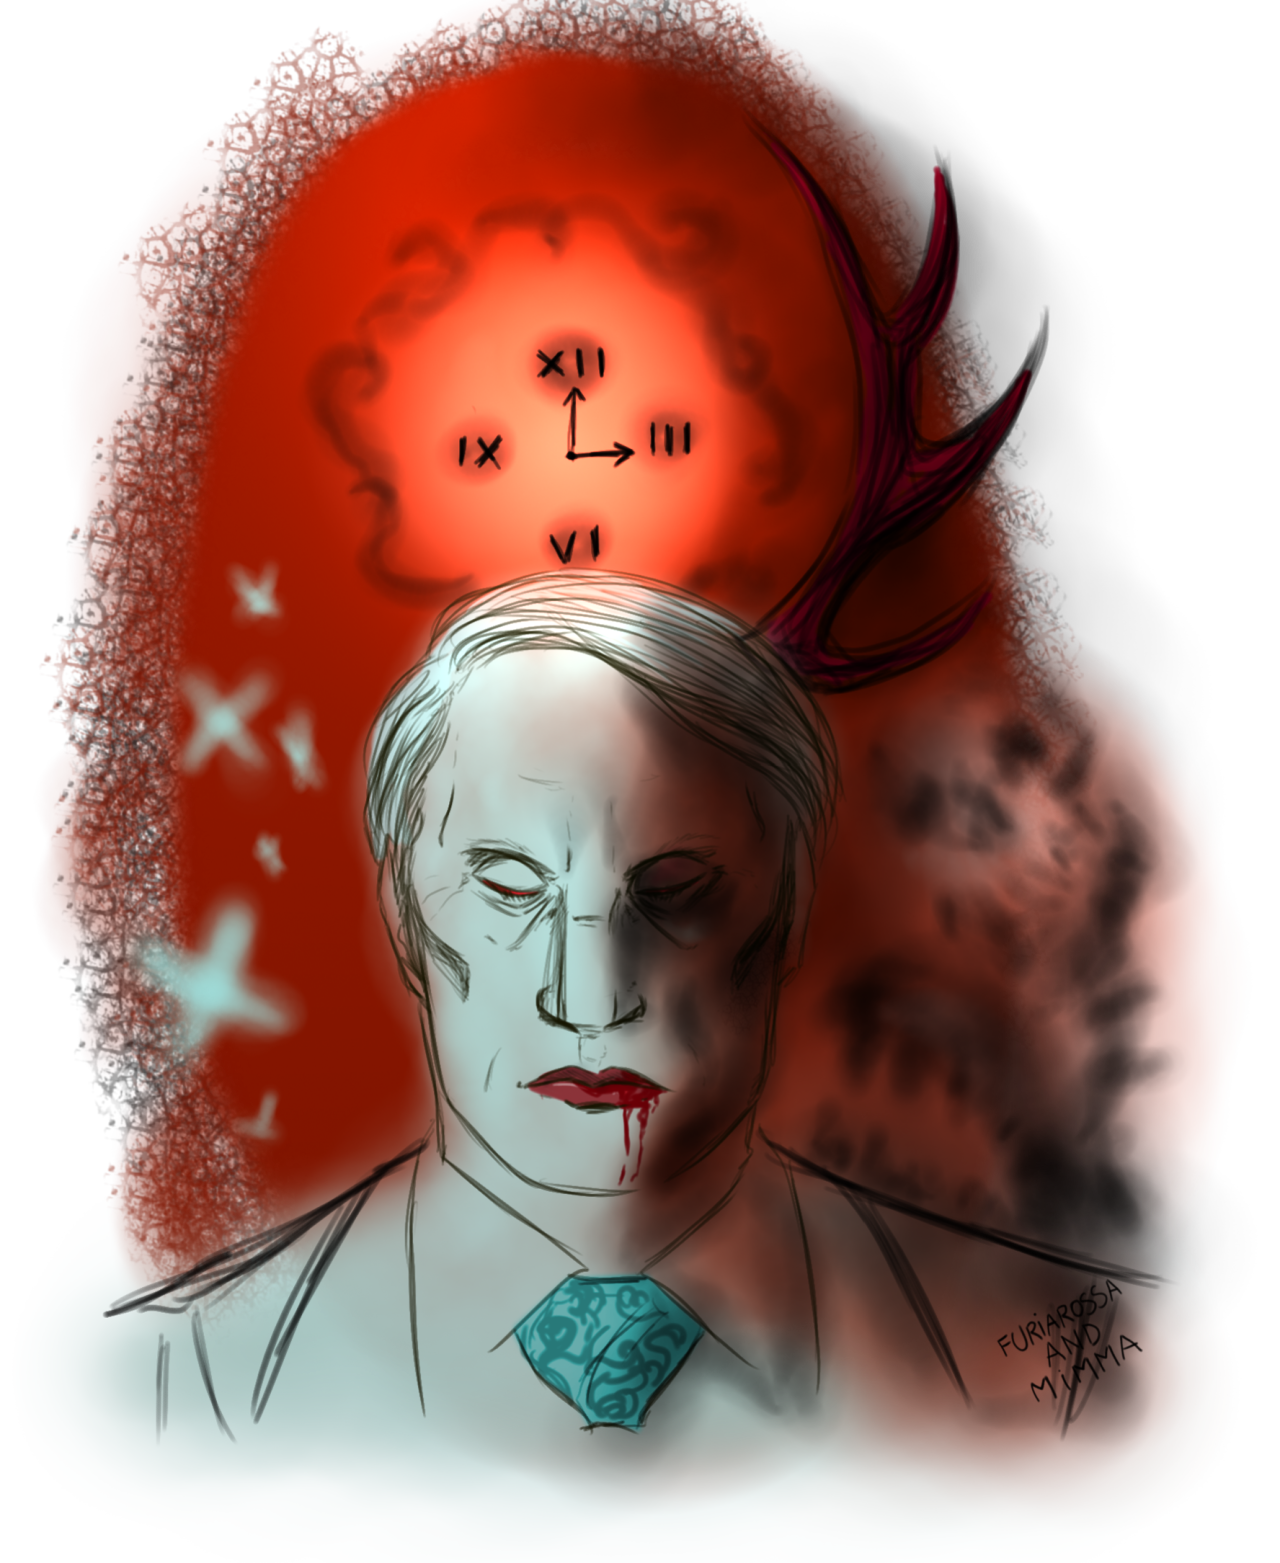 http://hannibalartblog.eu/post/152613985655/ive-had-to-draw-a-conclusion-based-on-what-i